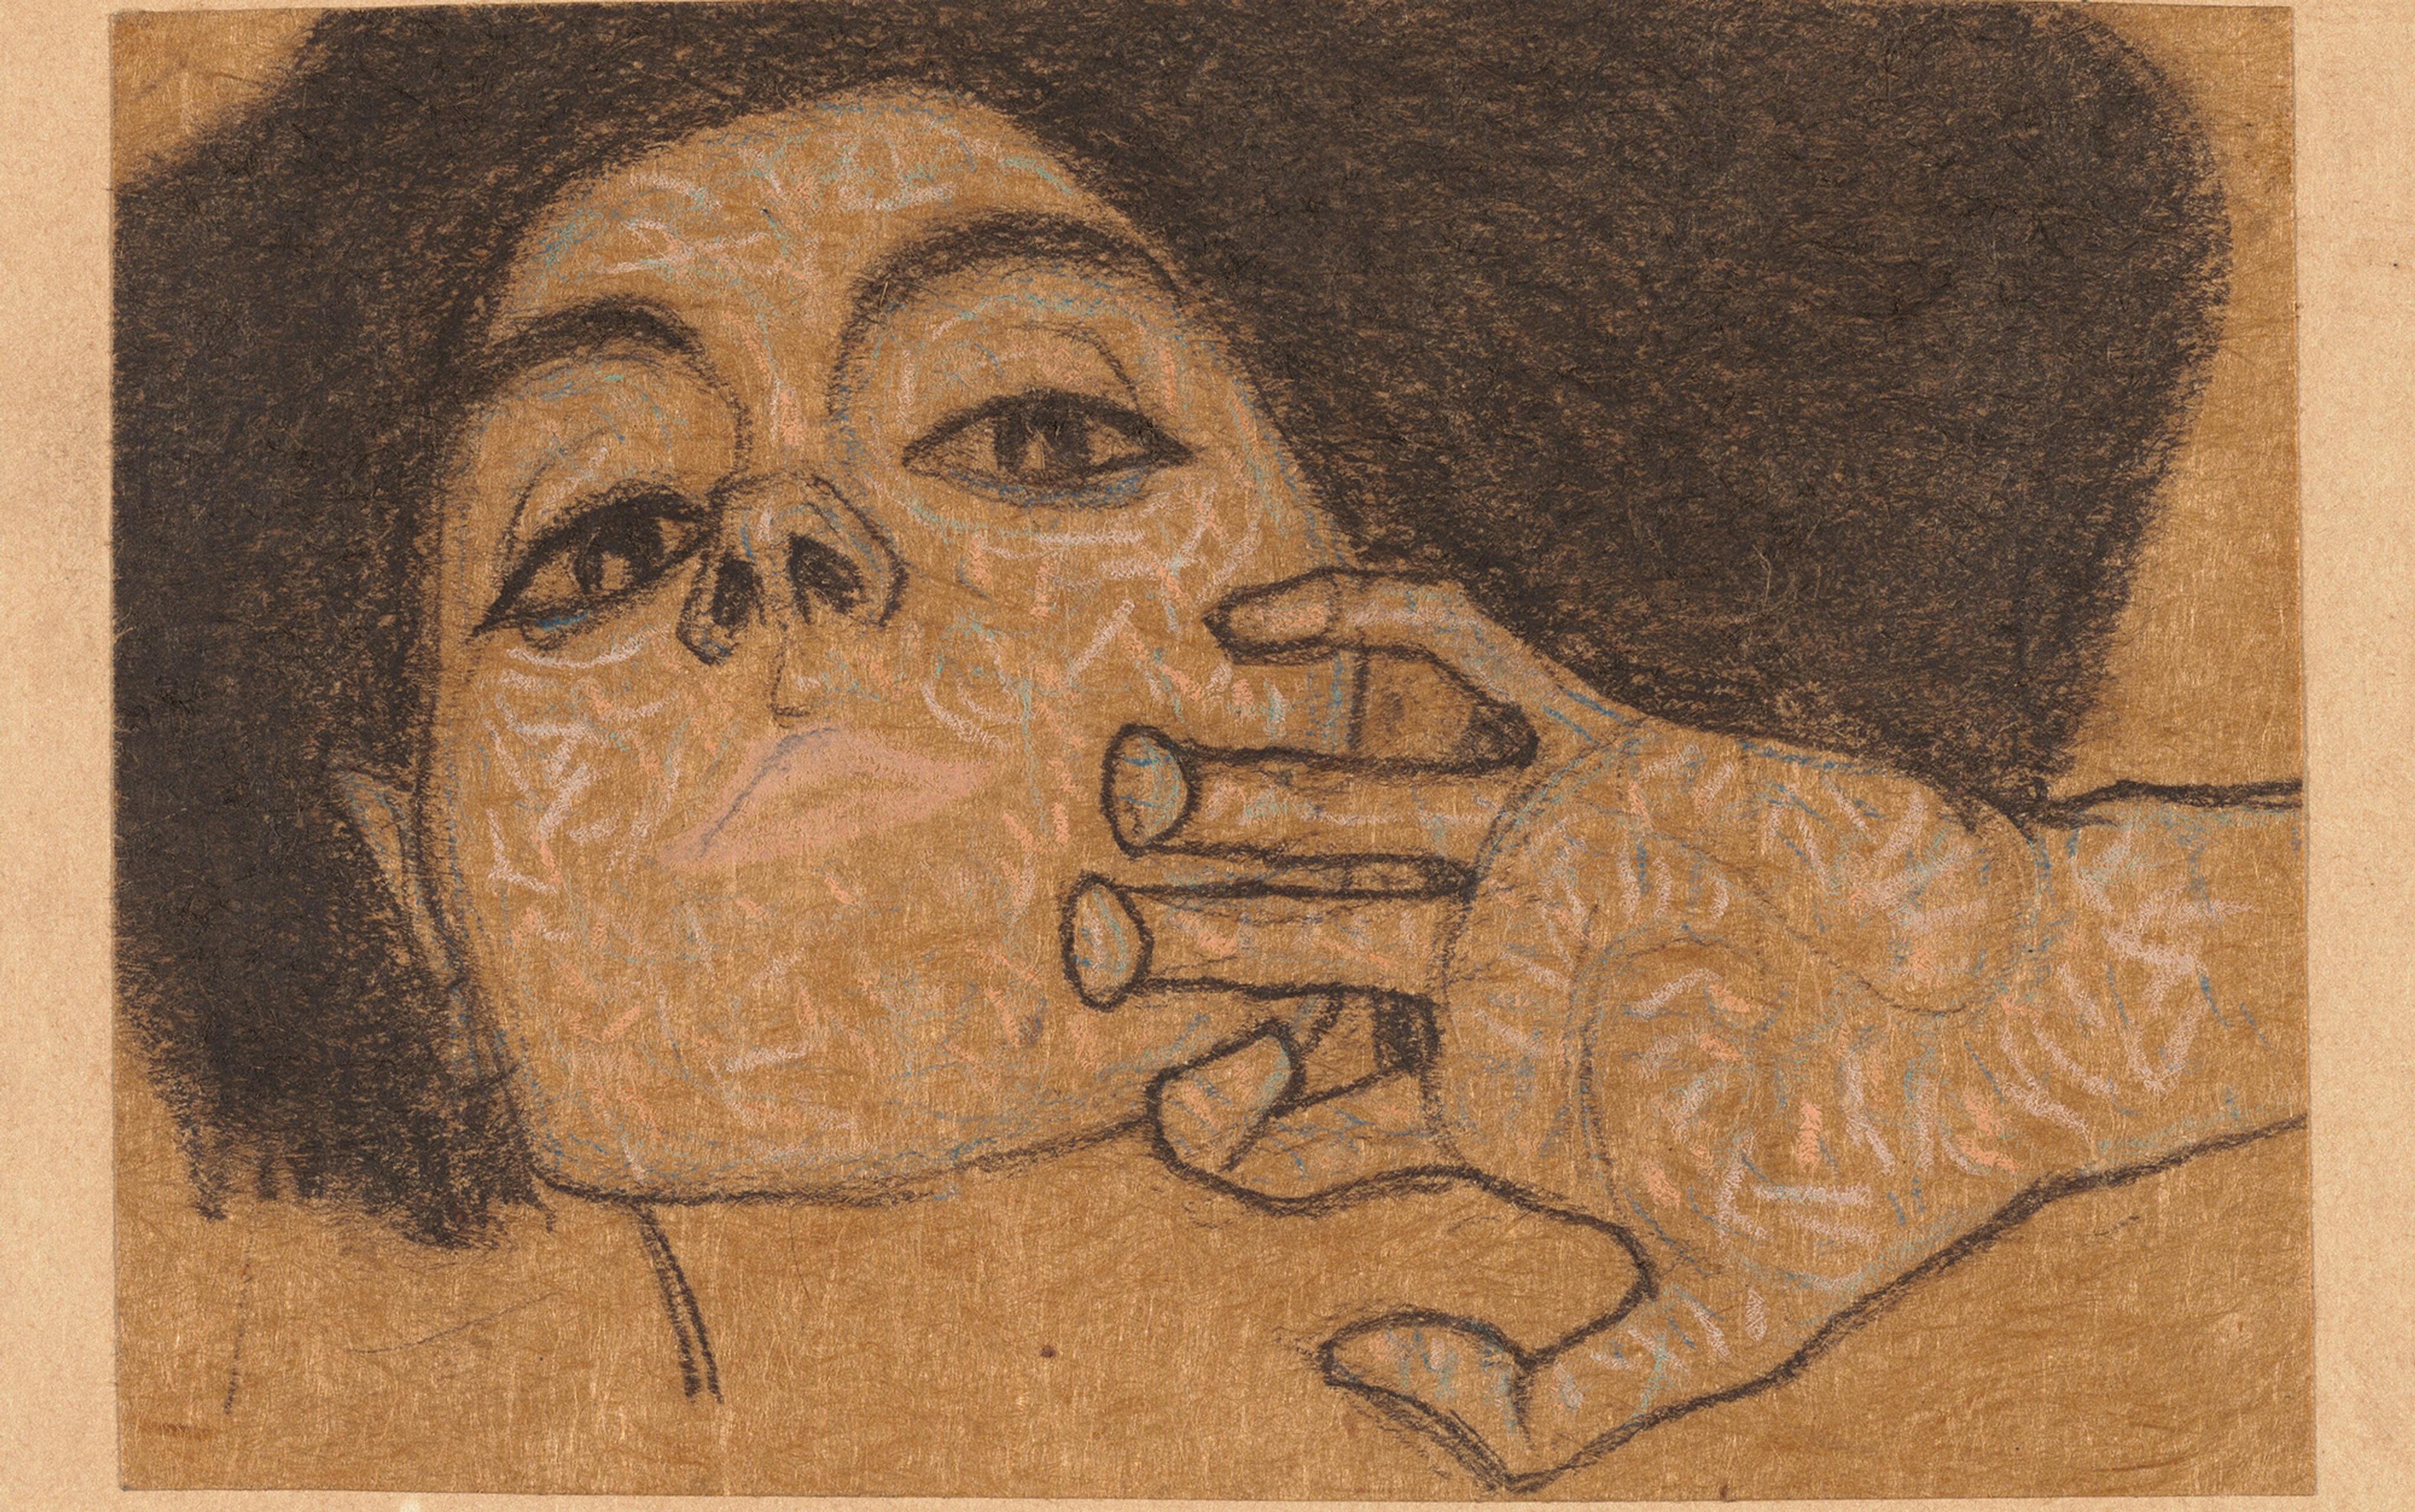 A close-up drawing of a face with detailed patterns and a hand touching the face, using earthy tones and texture on a brown background.